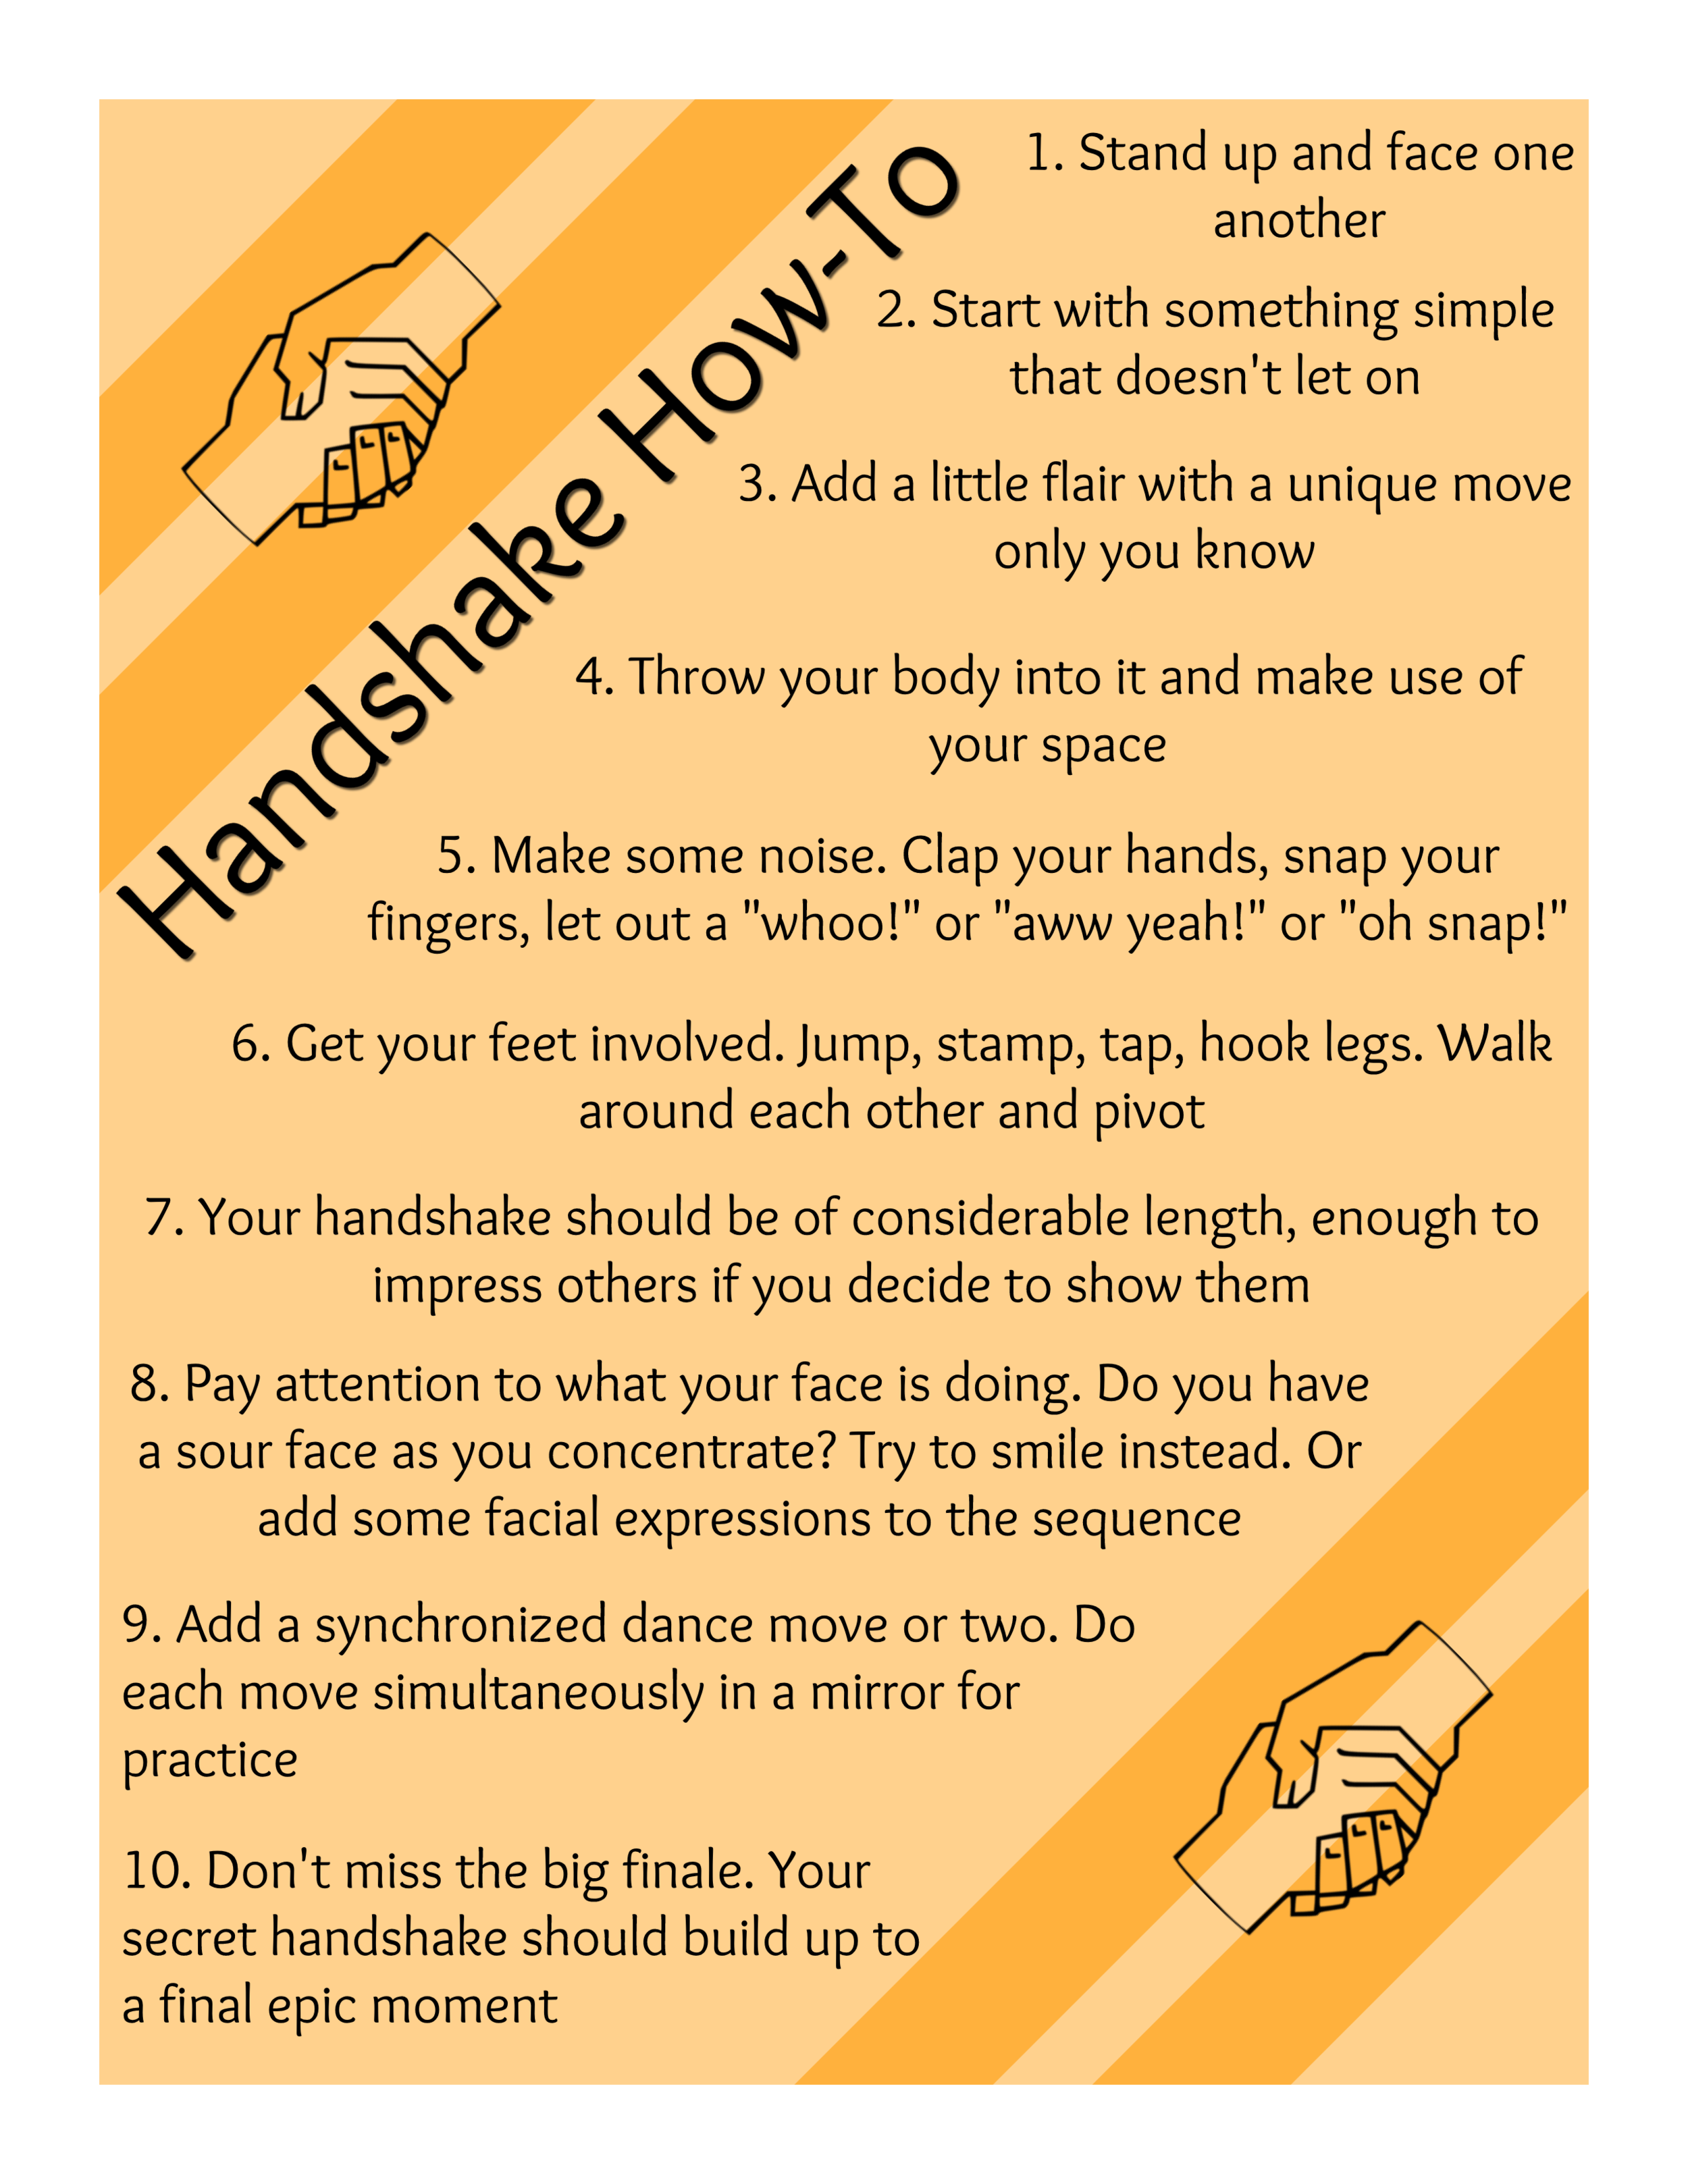 Handshake How To.png